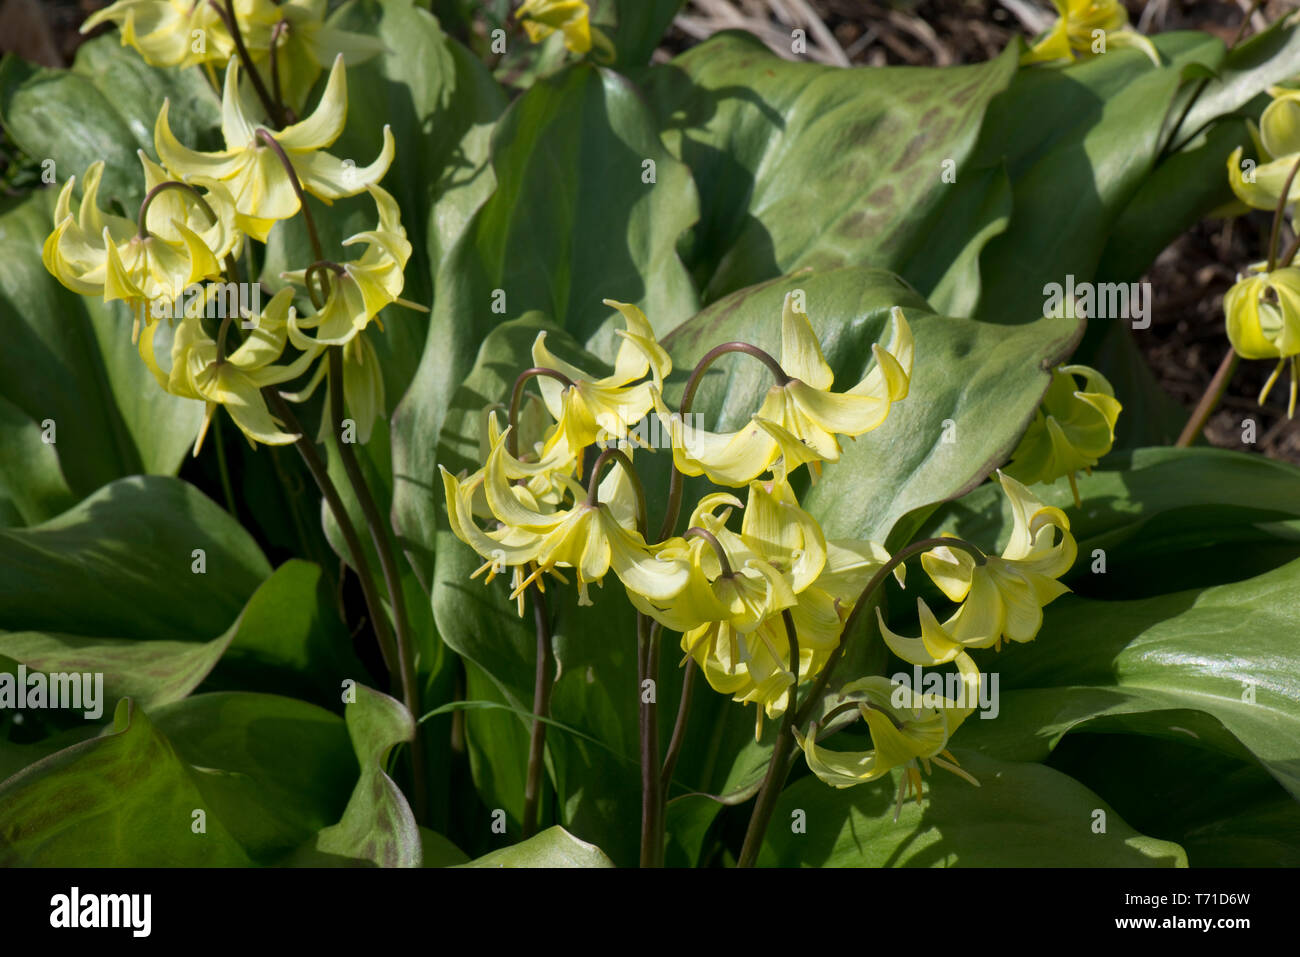 Erythronium 'Pagoda' a yellow flowing spring bulb in the lily family in a shady garden, Berkshire, April Stock Photo